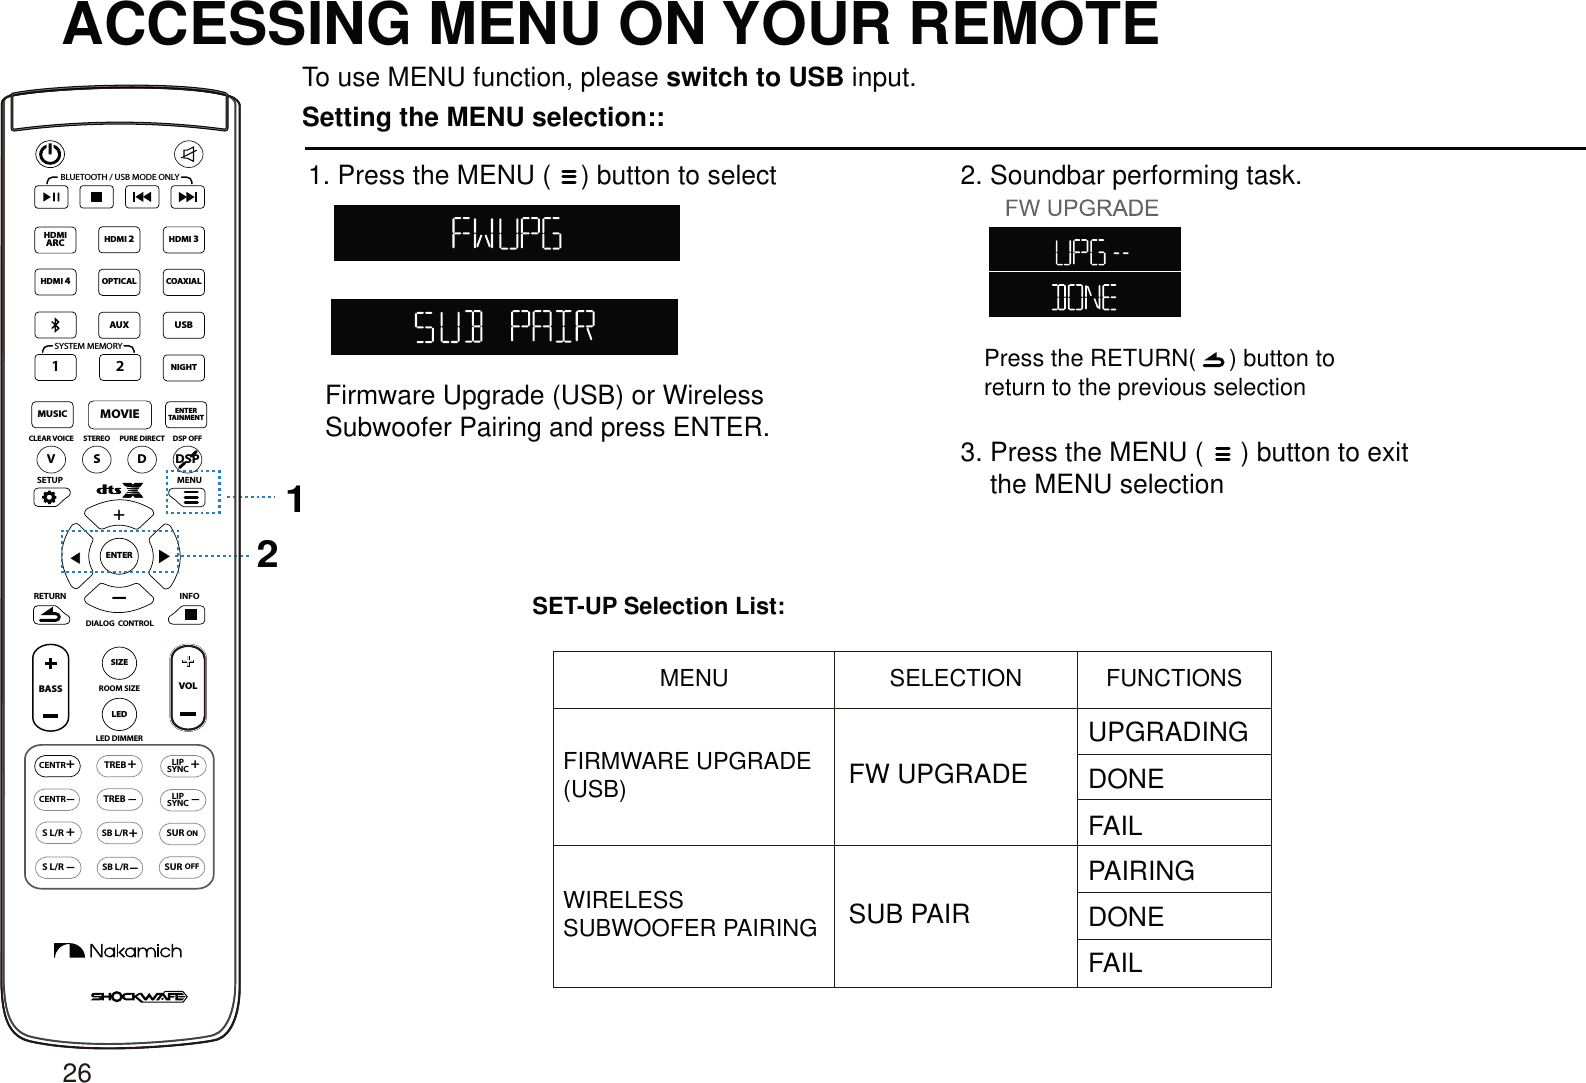 ACCESSING MENU ON YOUR REMOTETo use MENU function, please switch to USB input.Setting the MENU selection::1. Press the MENU (    ) button to select+SETUP MENUENTER12Press the RETURN(     ) button to return to the previous selectionSET-UP Selection List:CENTR++LEDSIZERETURN INFOLED DIMMERVOL+TREBCENTRONSURSUROFFTREB+LIPSYNC+SB L/RSB L/R+S L/RS L/RLIPSYNCBASSROOM SIZEDIALOG  CONTROLVSDCLEAR VOICE STEREO PURE DIRECT DSP OFFBLUETOOTH / USB MODE ONLYSYSTEM MEMORYDSPHDMI 2HDMI 3MOVIEENTERTAINMENTMUSICOPTICAL2AUXHDMIARCHDMI 4COAXIALUSB1NIGHTFirmware Upgrade (USB) or Wireless Subwoofer Pairing and press ENTER.2. Soundbar performing task.3. Press the MENU (     ) button to exit     the MENU selectionMENU SELECTION FUNCTIONSFIRMWARE UPGRADE (USB)WIRELESS SUBWOOFER PAIRING SUB PAIRFW UPGRADEUPGRADINGDONEDONEFAILFAILPAIRING26